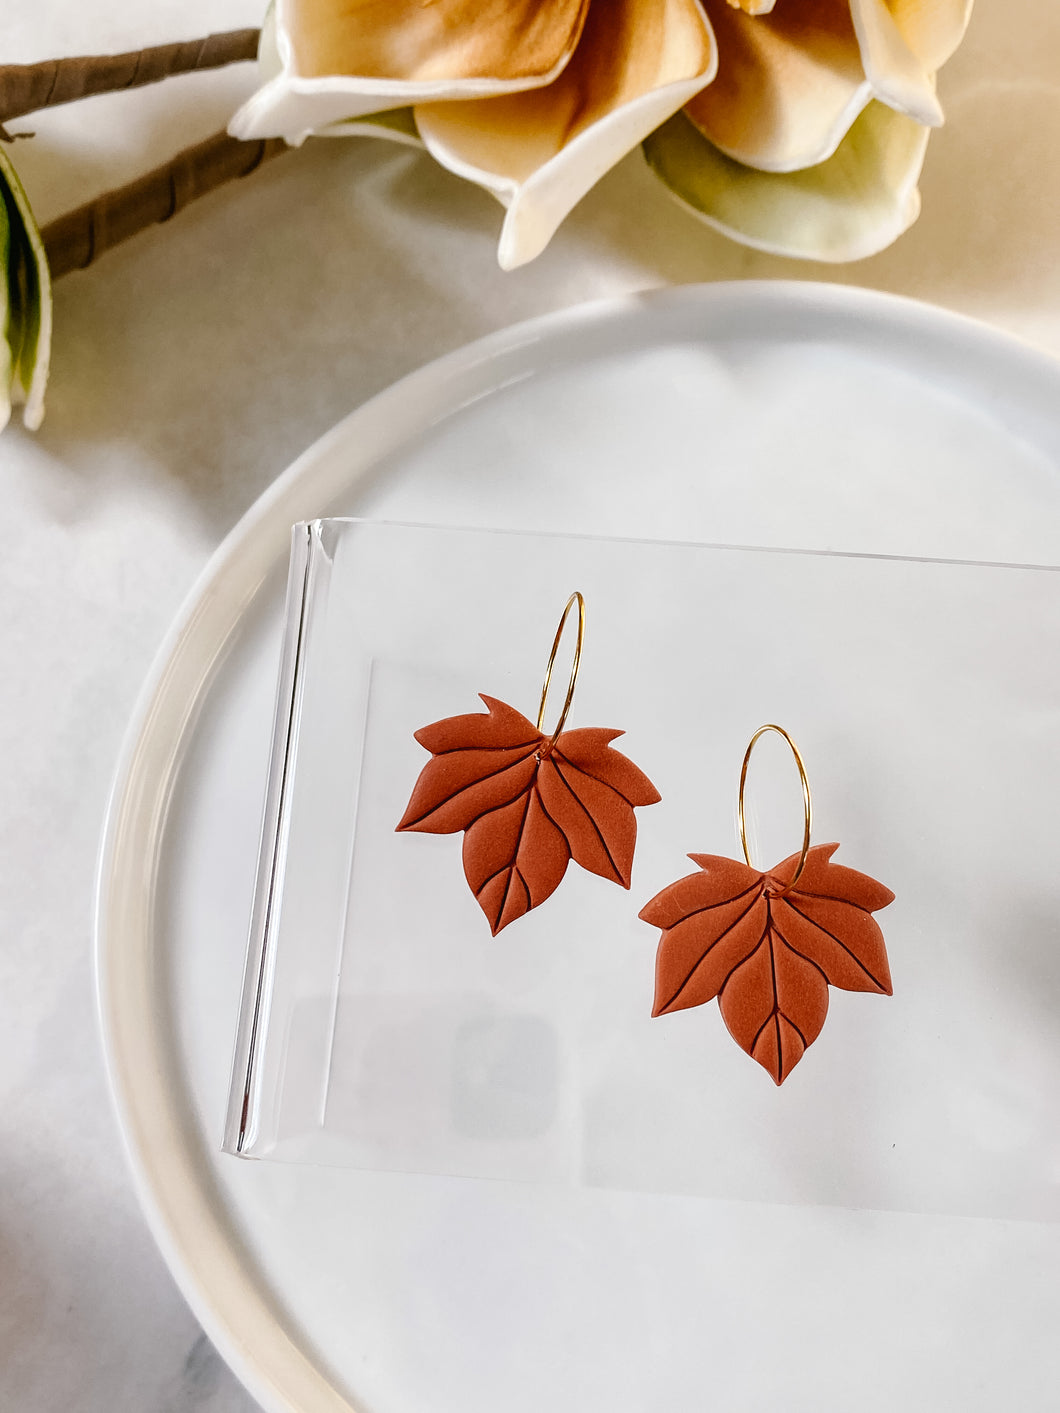 The Maple Leaves in Terracotta